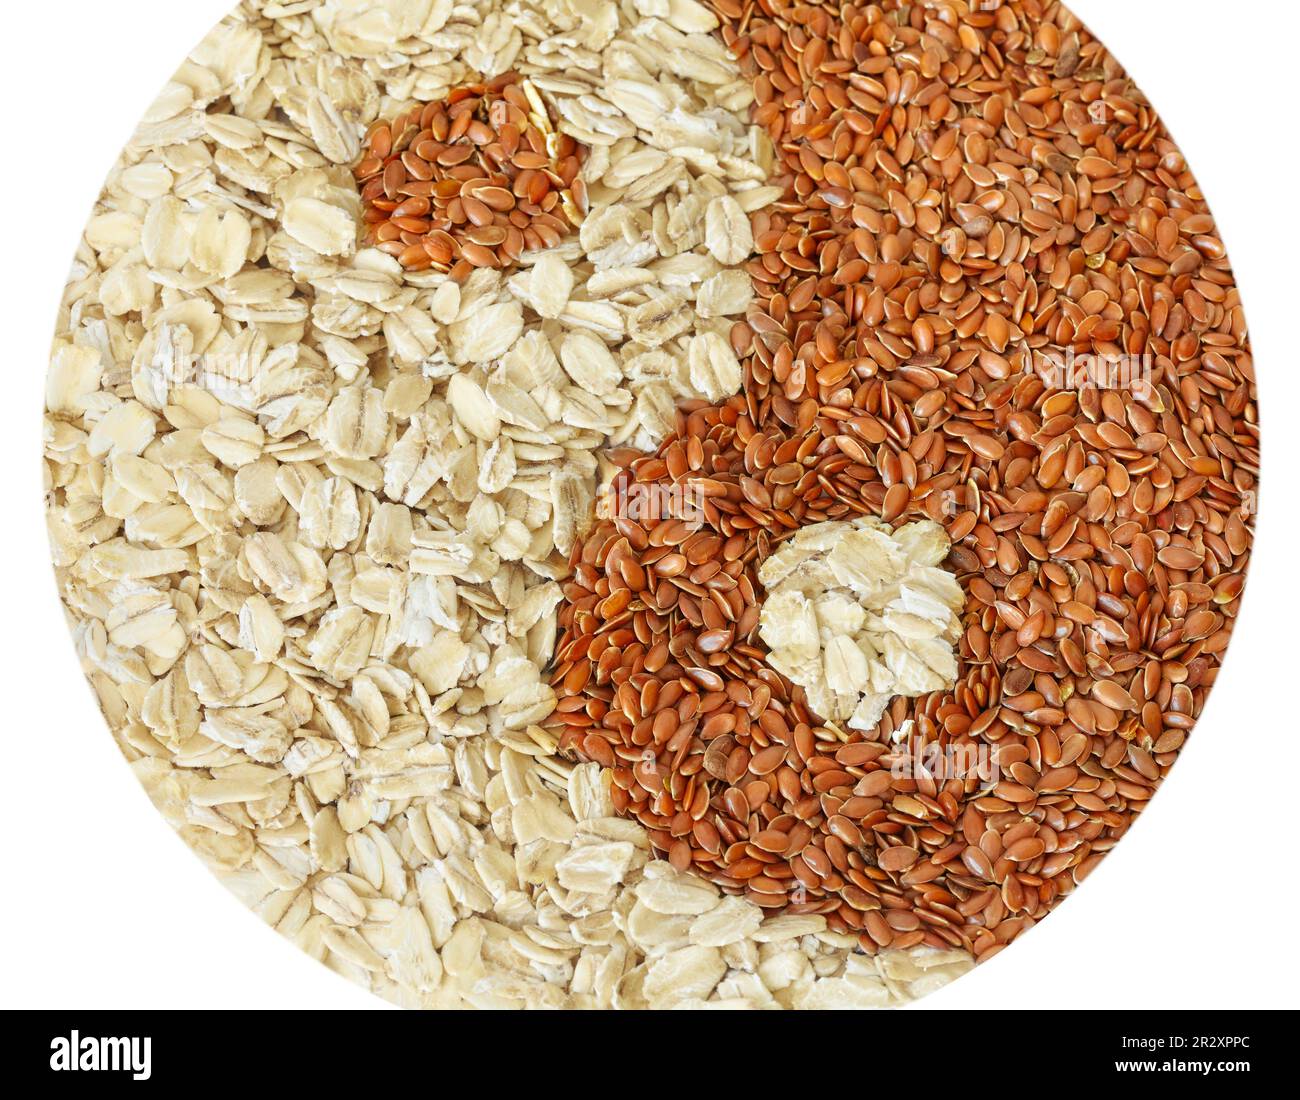 Yin and yang symbol made of flax seeds and whole grain oats isolated on white background. Stock Photo